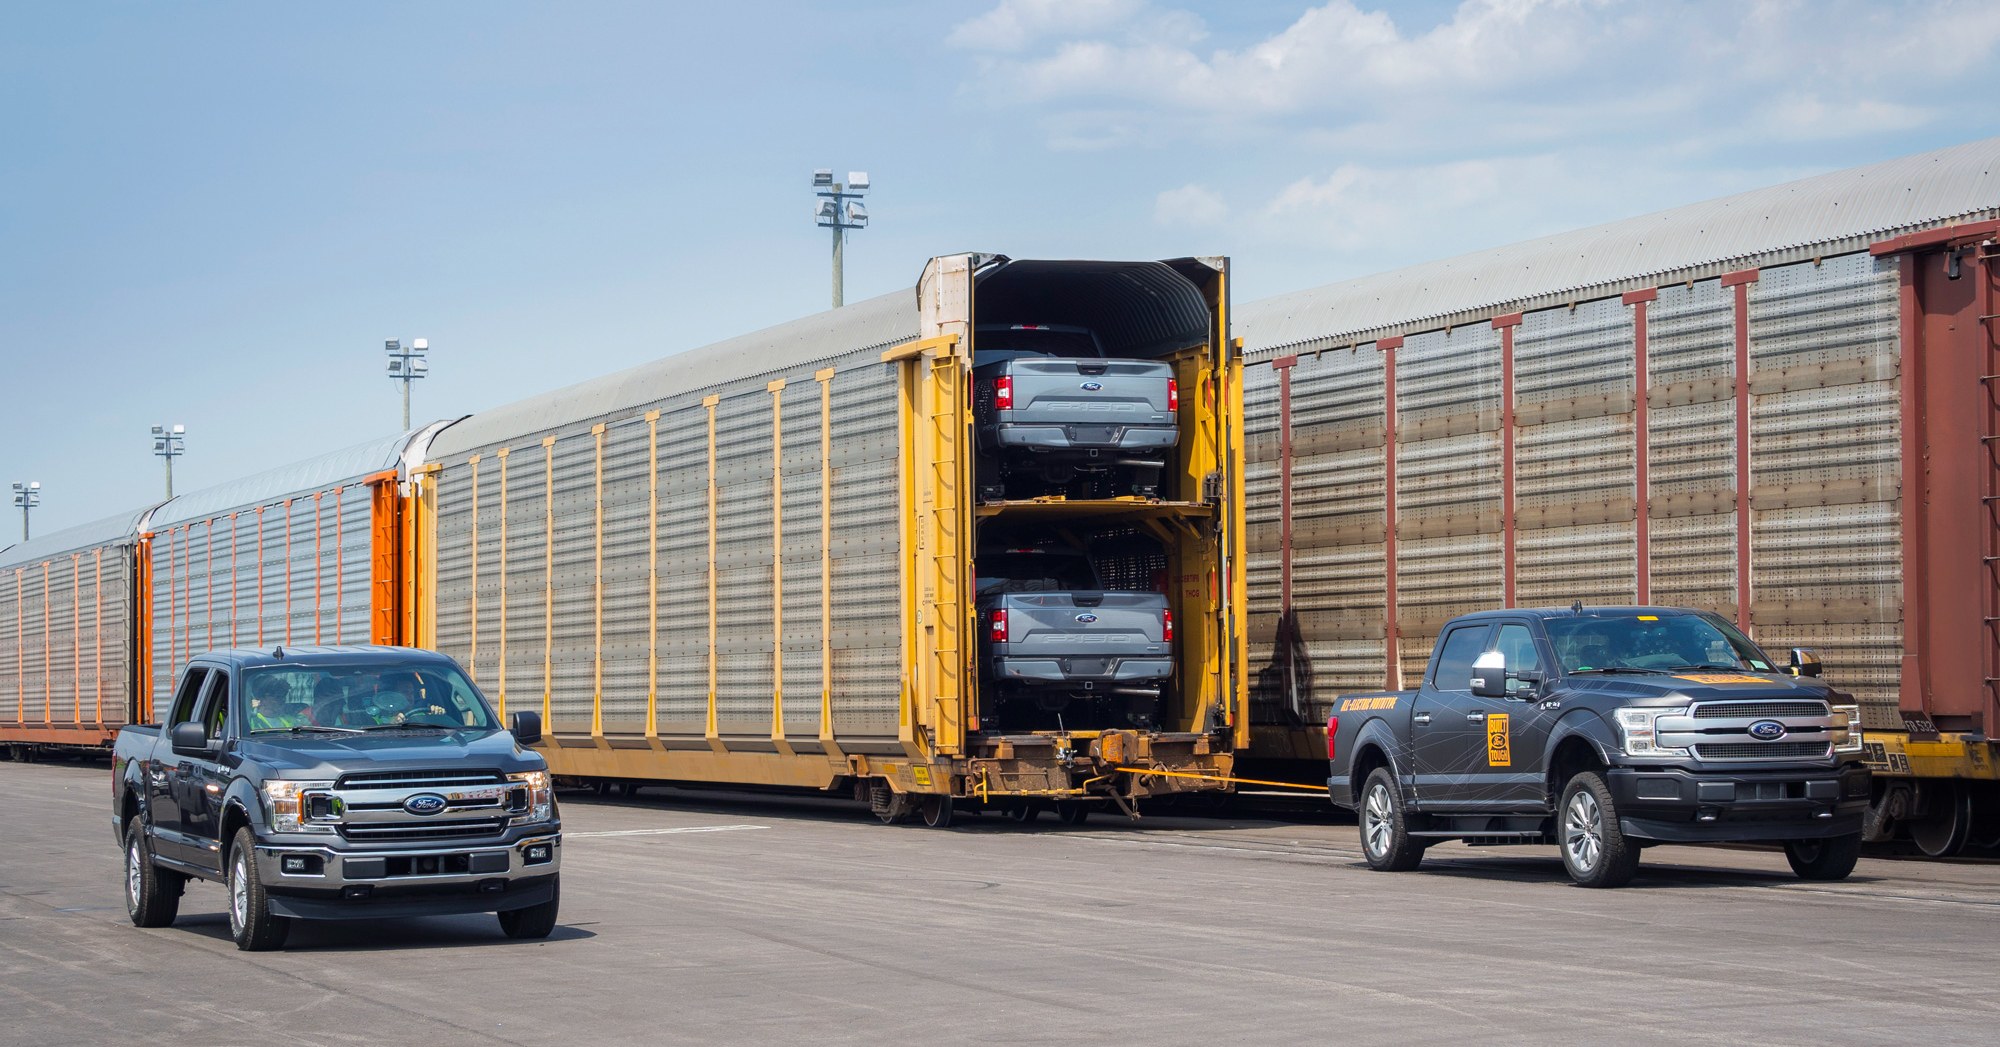 An Electric Pickup Truck Really Could Pull a Freight Train—Here’s How